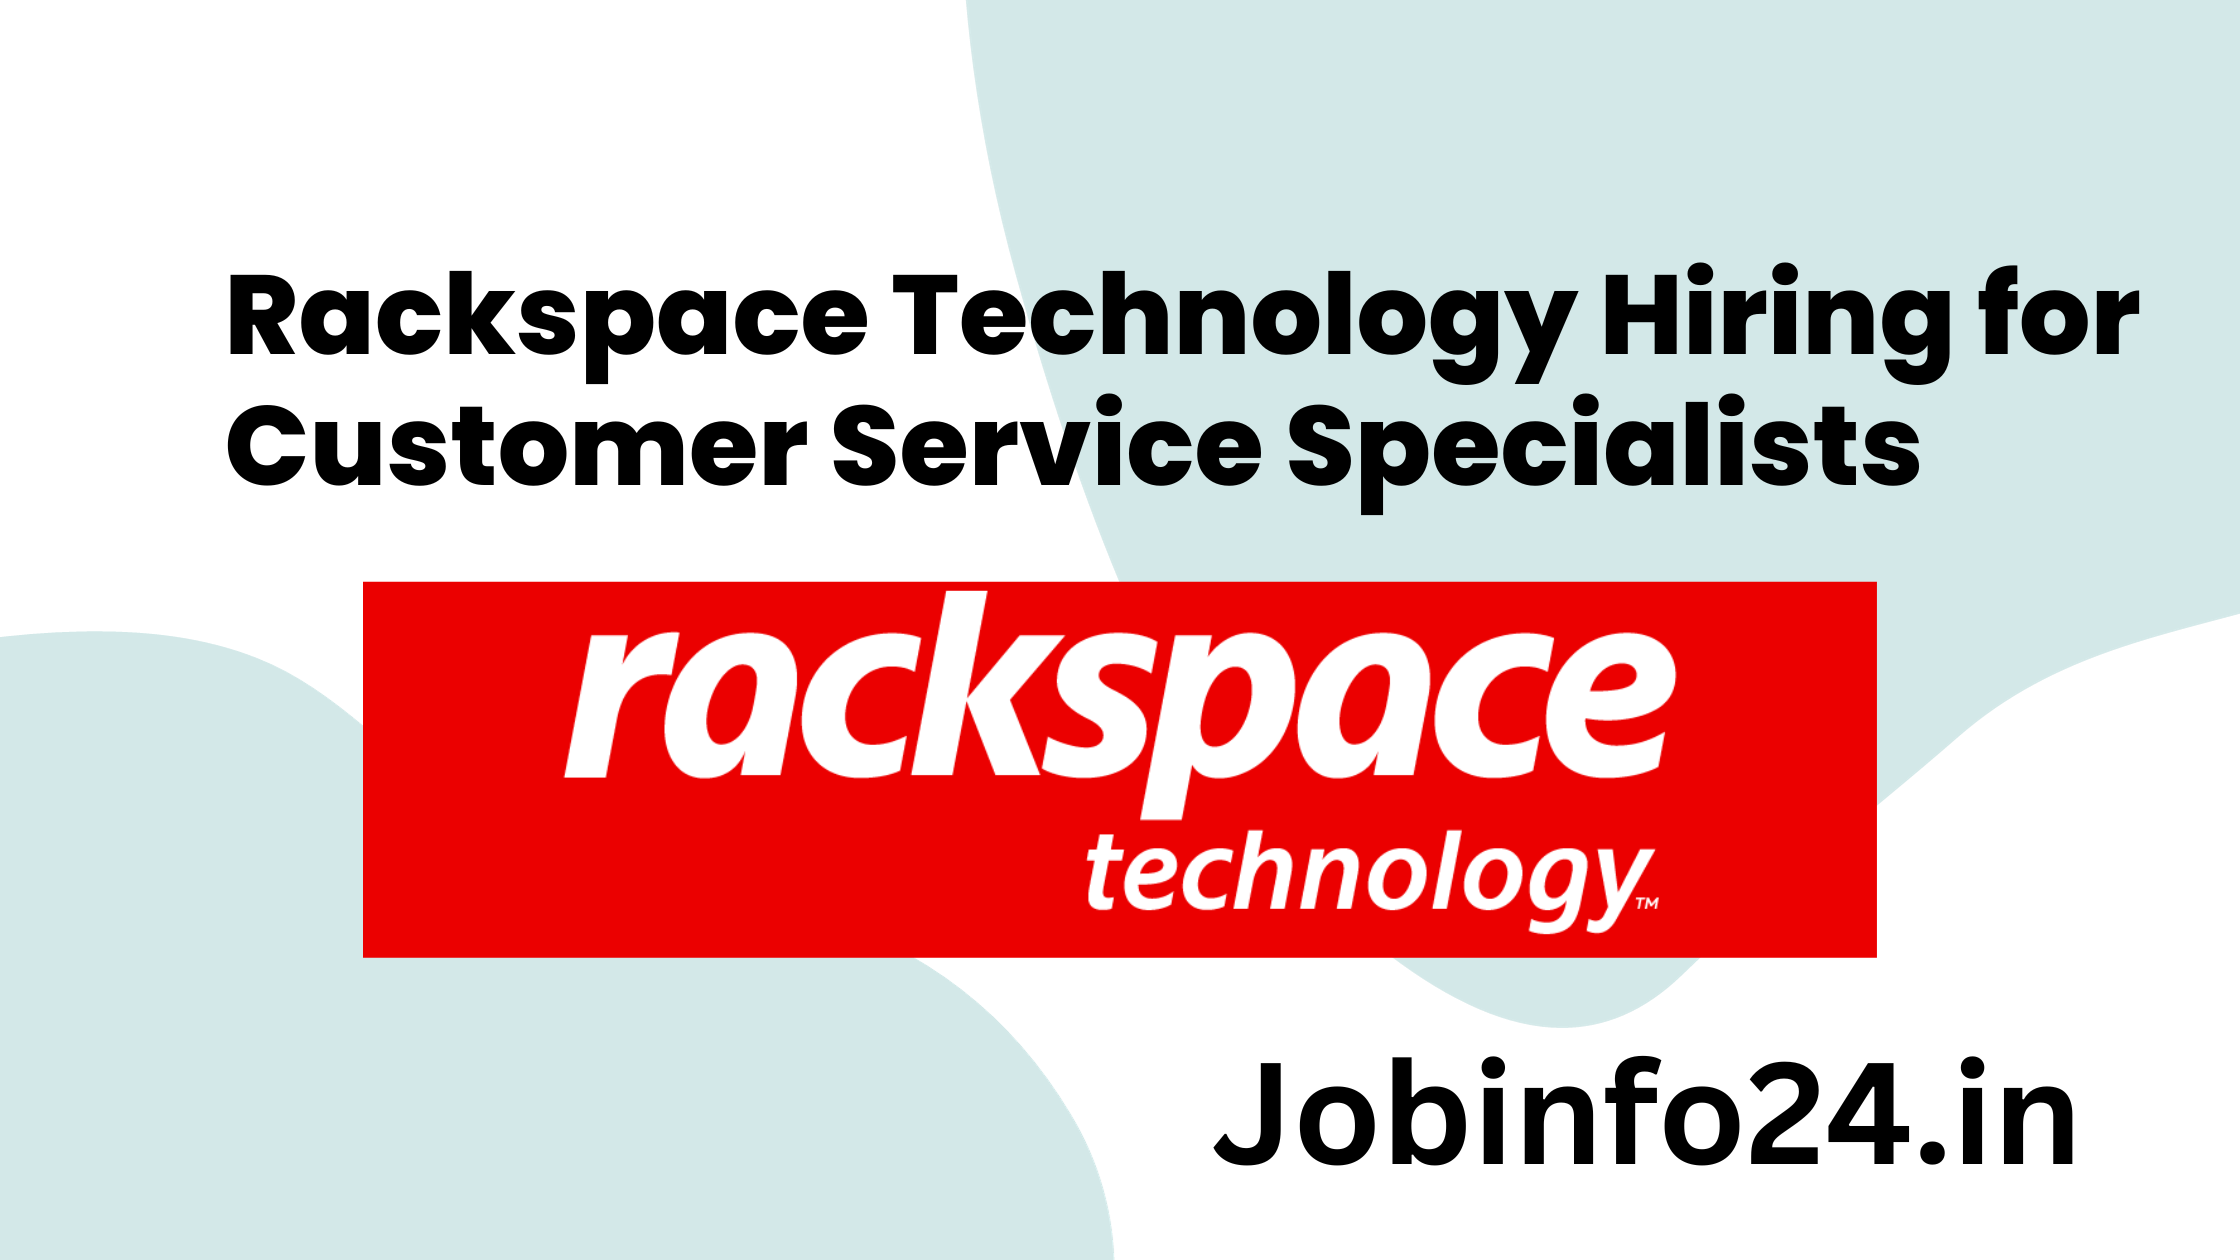 Rackspace Technology Hiring for Customer Service Specialists 